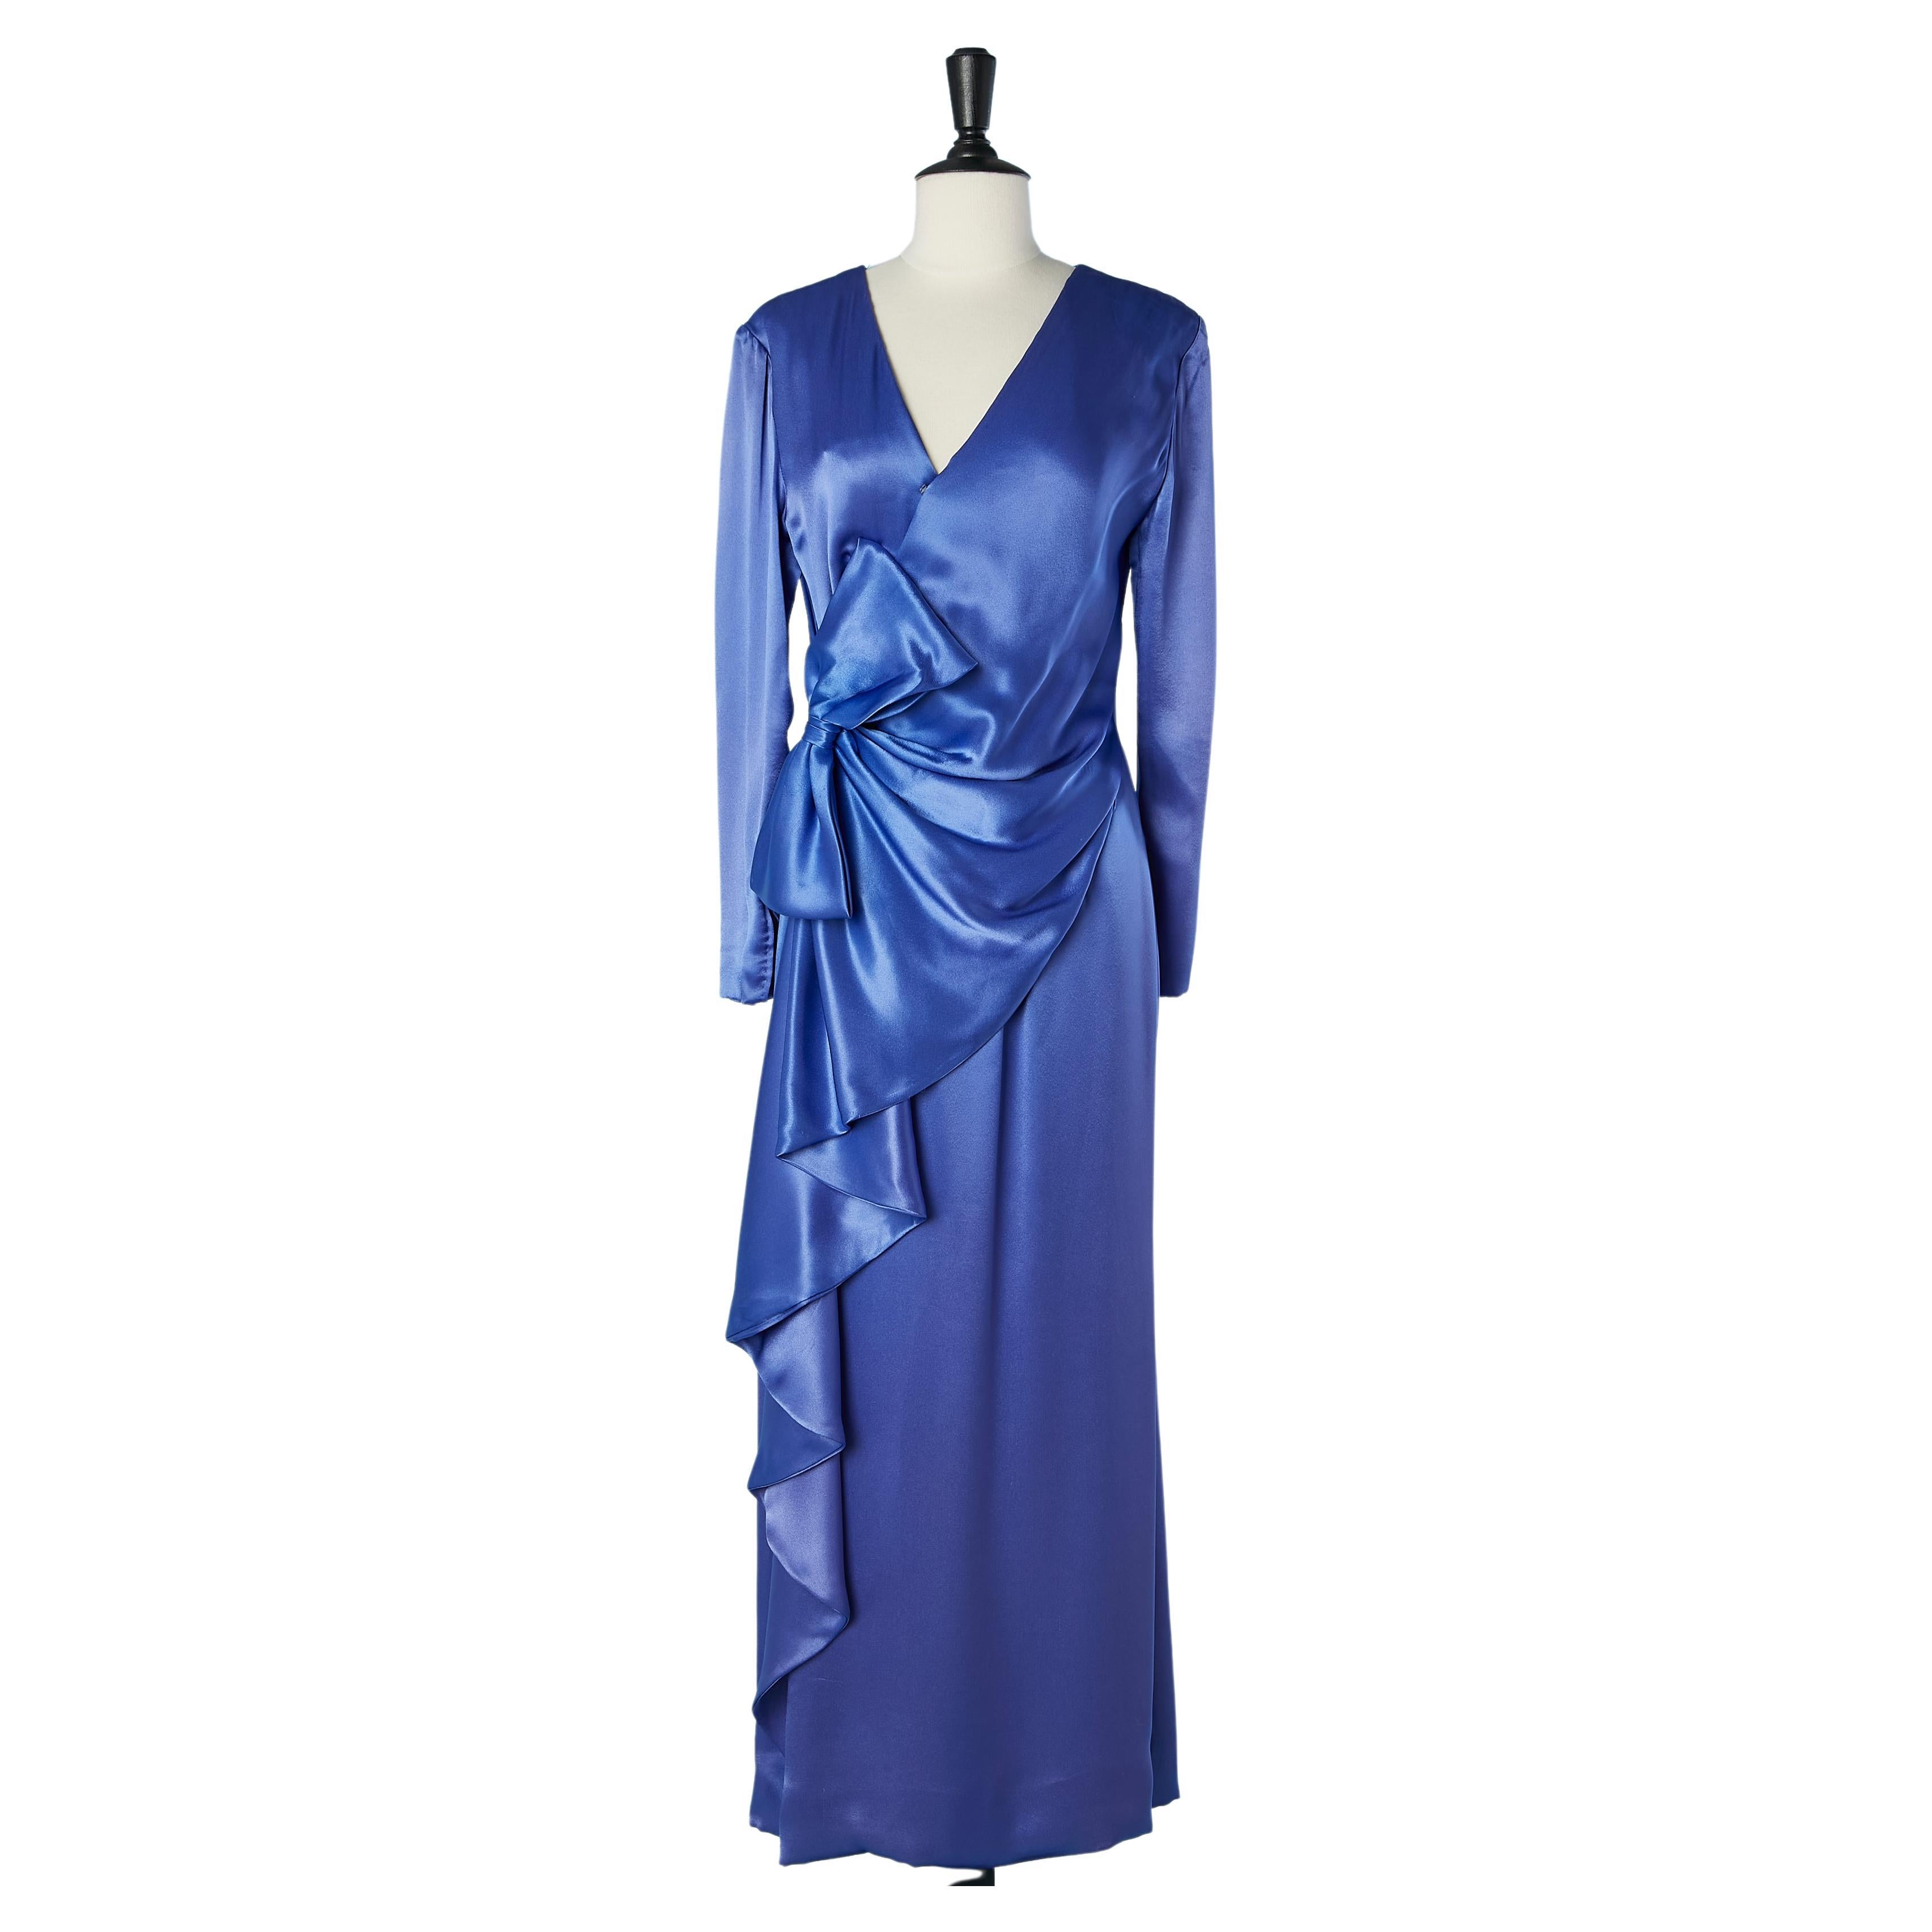 Satin asymmetrical draped cocktail dress with bow Givenchy Nouvelle Boutique